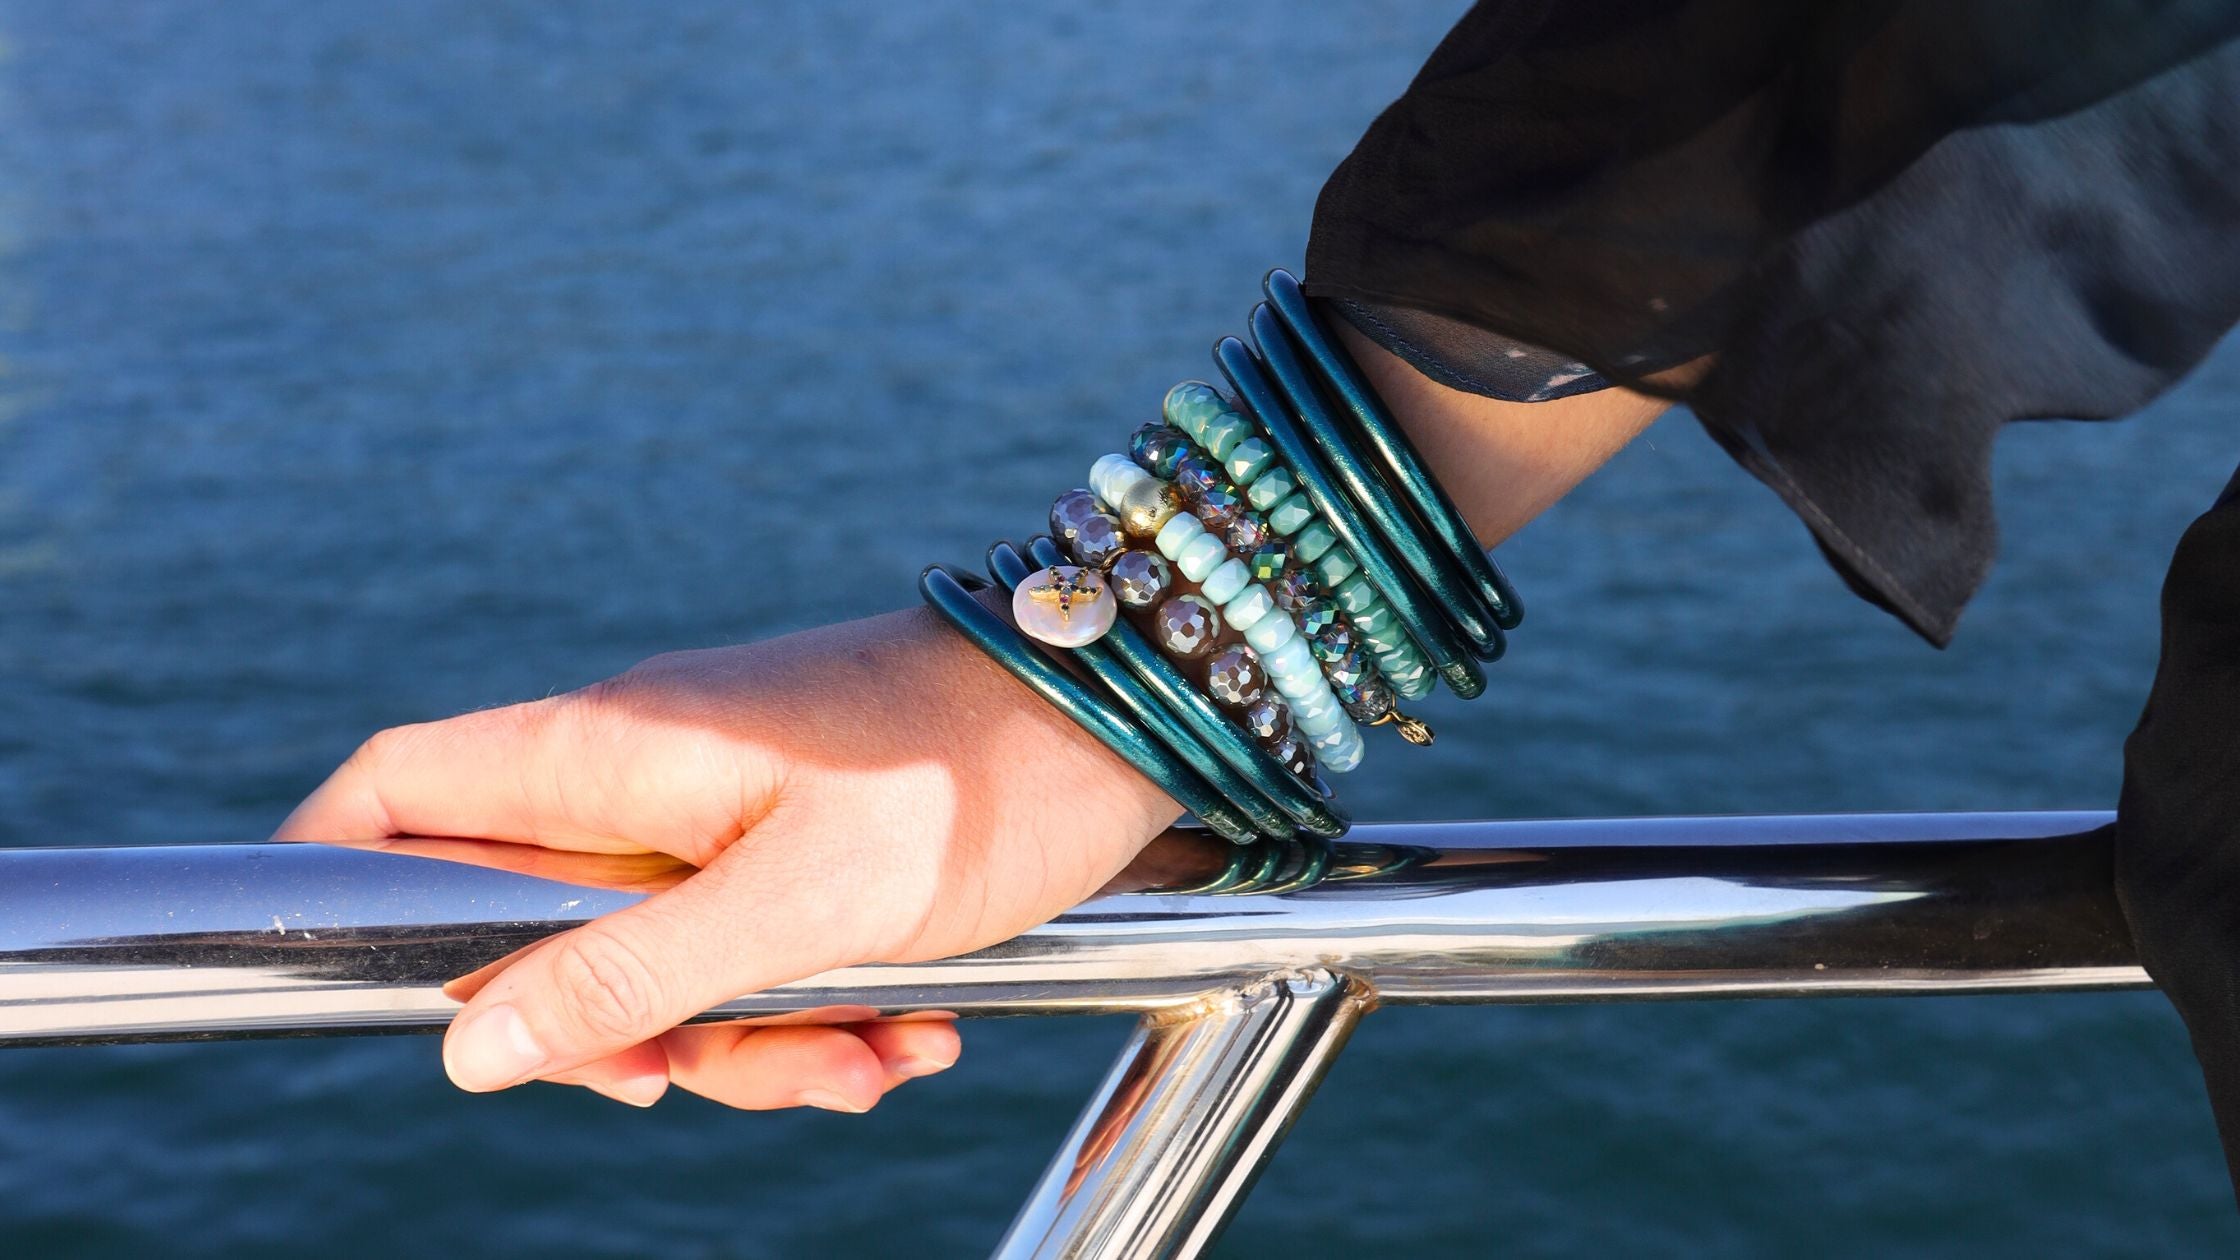 Vacation Jewelry: Travel Tips for Keeping Jewelry Safe and Secure on Vacation